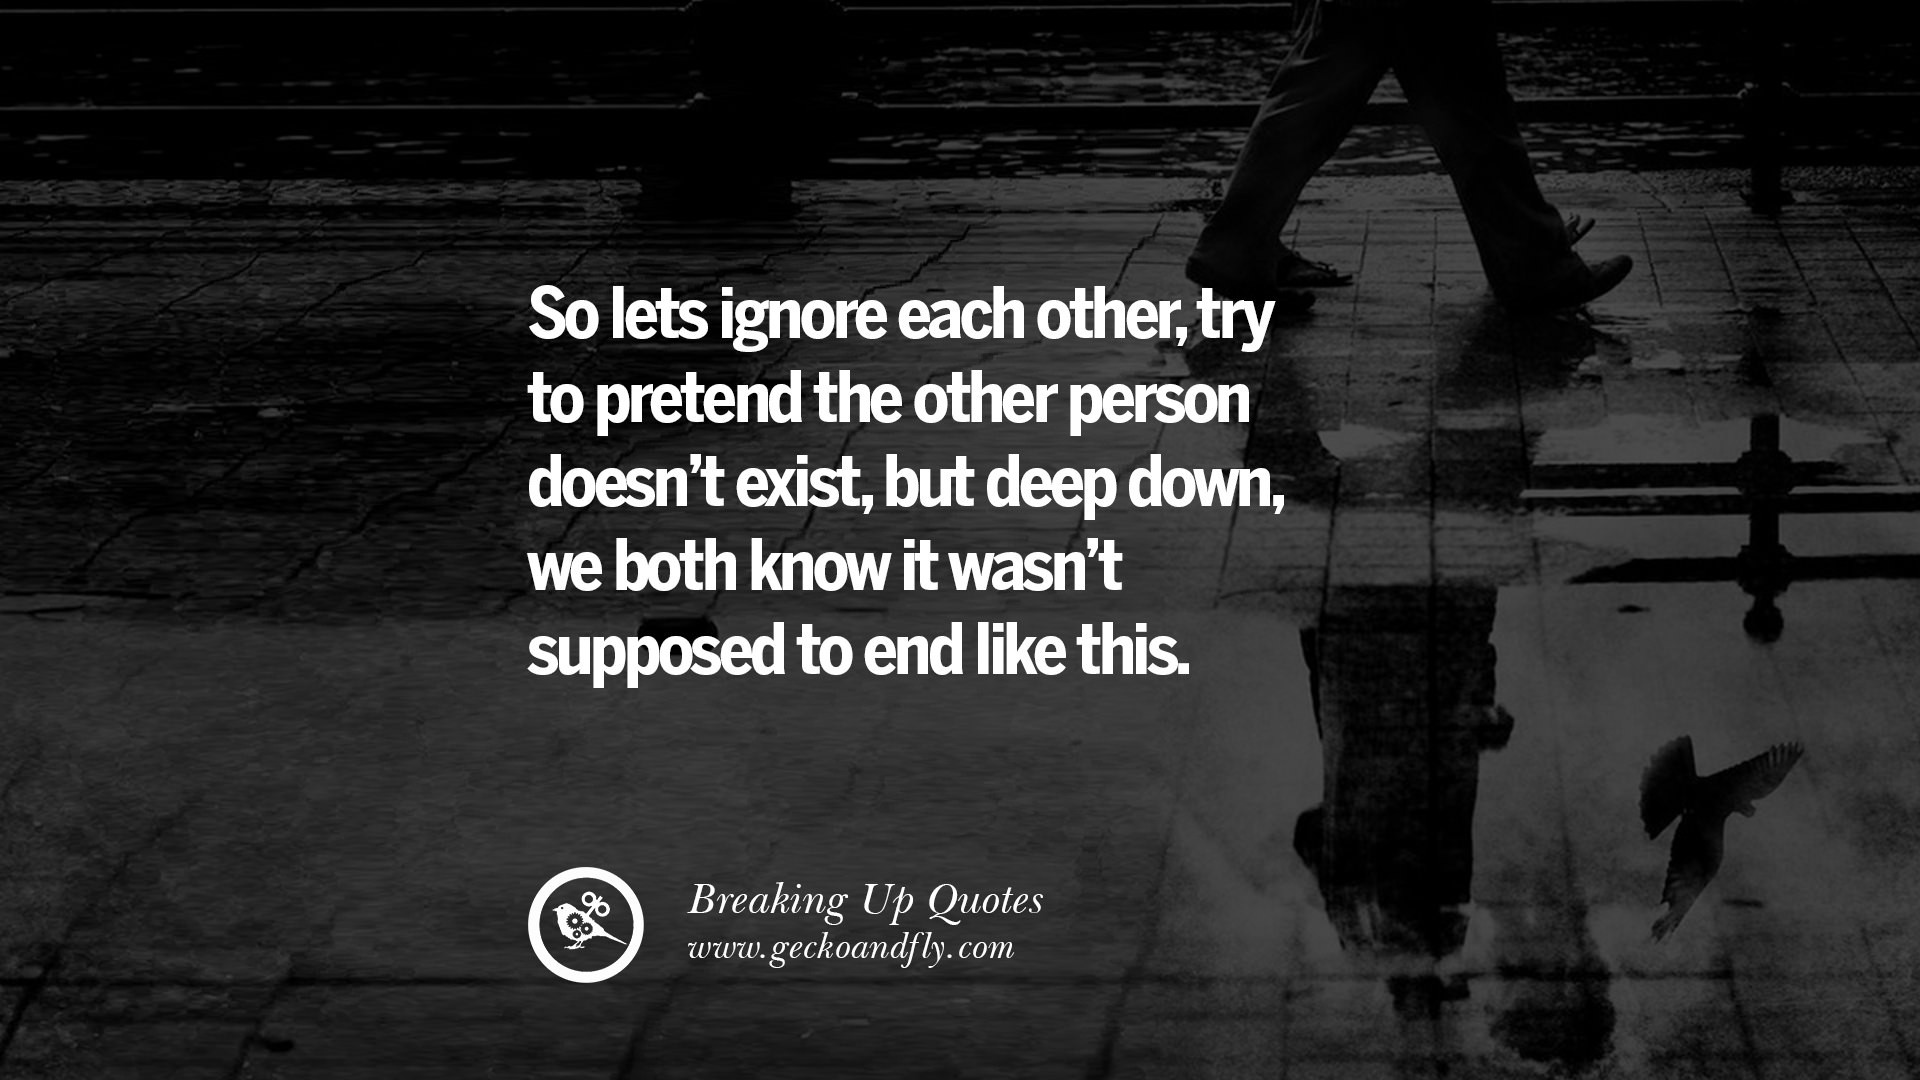 Relationship Break Up Quotes
 45 Quotes Getting Over A Break Up After A Bad Relationship